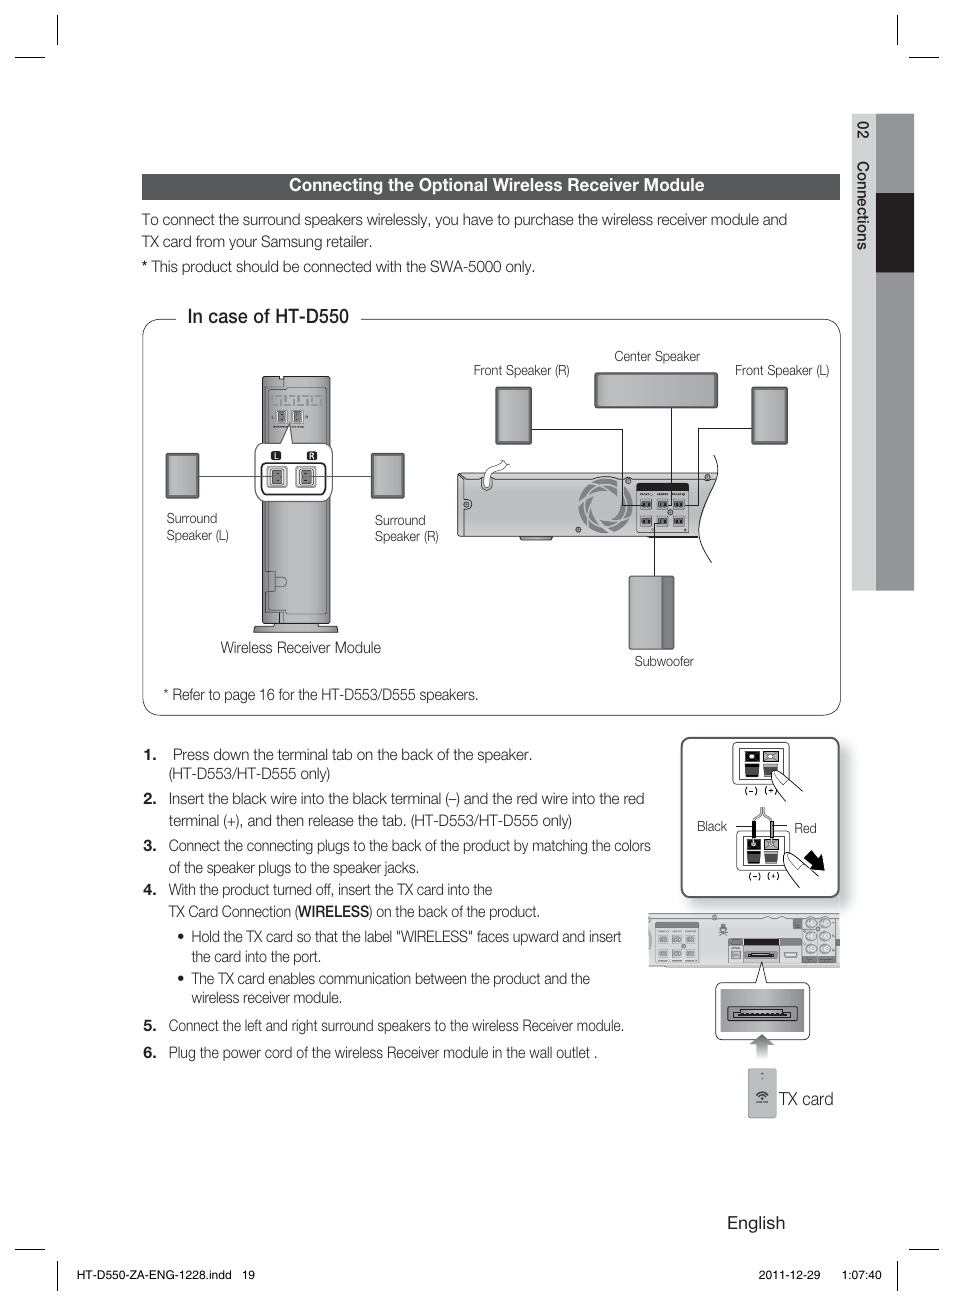 English, Connecting the optional wireless receiver module, Tx card | Samsung  HT-D550-ZA User Manual | Page 19 / 50 | Original mode